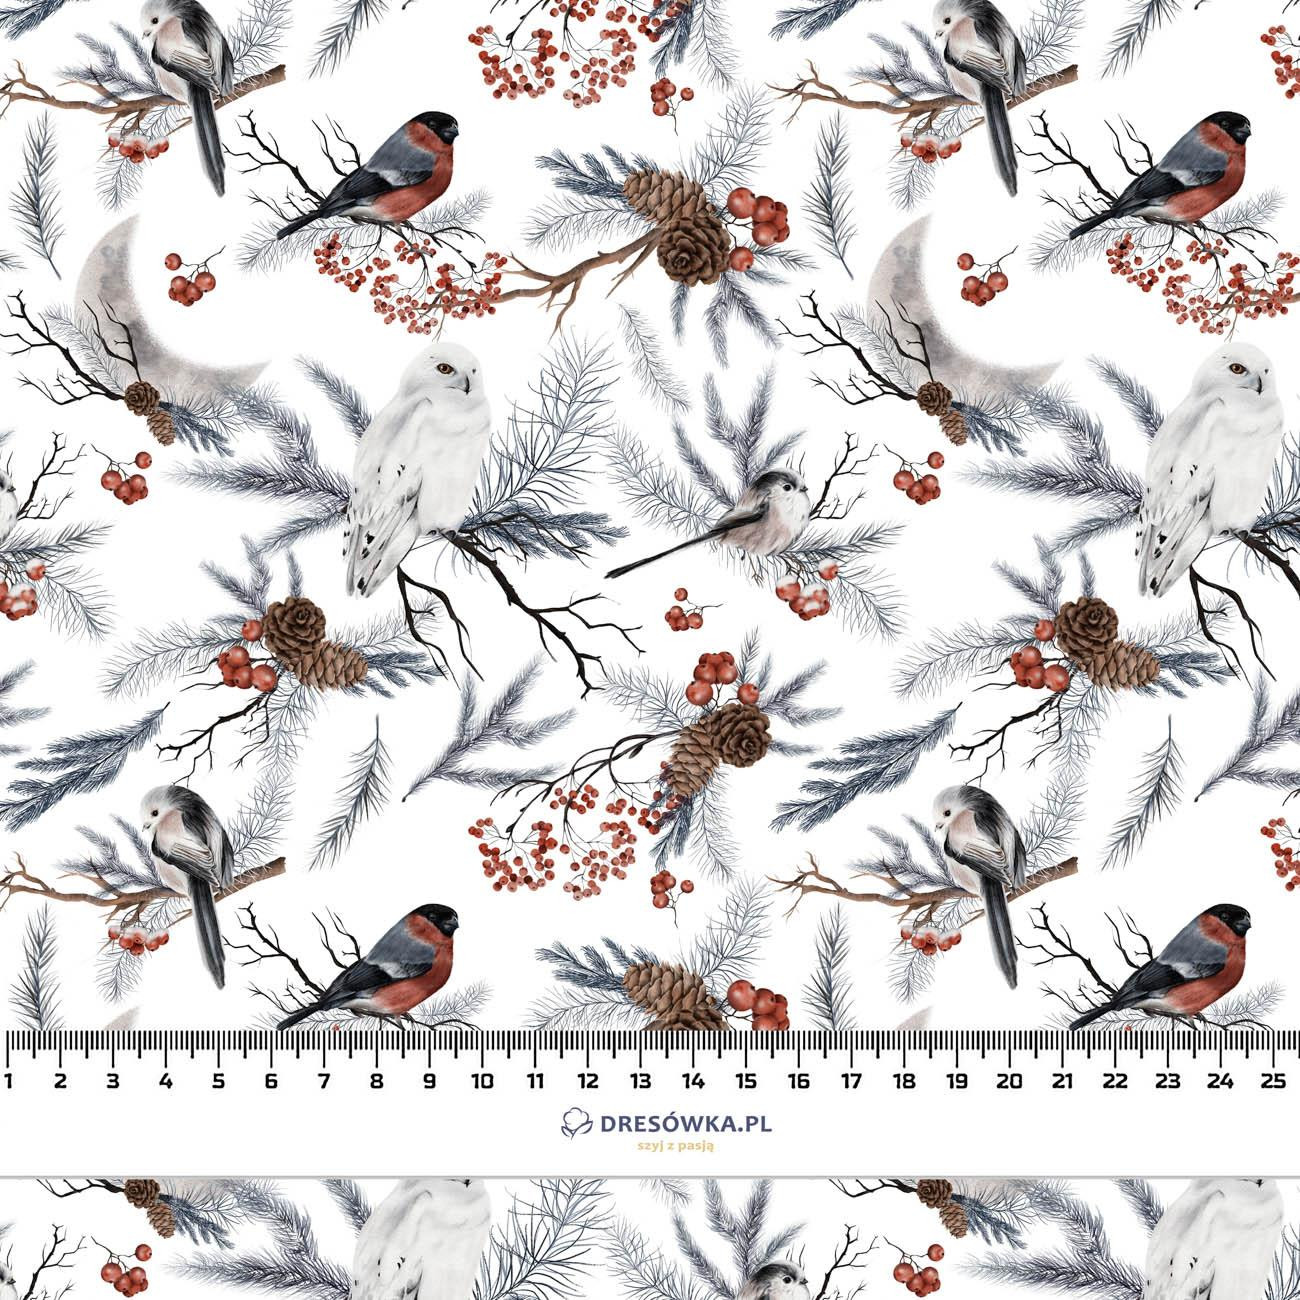 WINTER BIRDS pat. 1 (WINTER IN PARK) - Woven Fabric for tablecloths